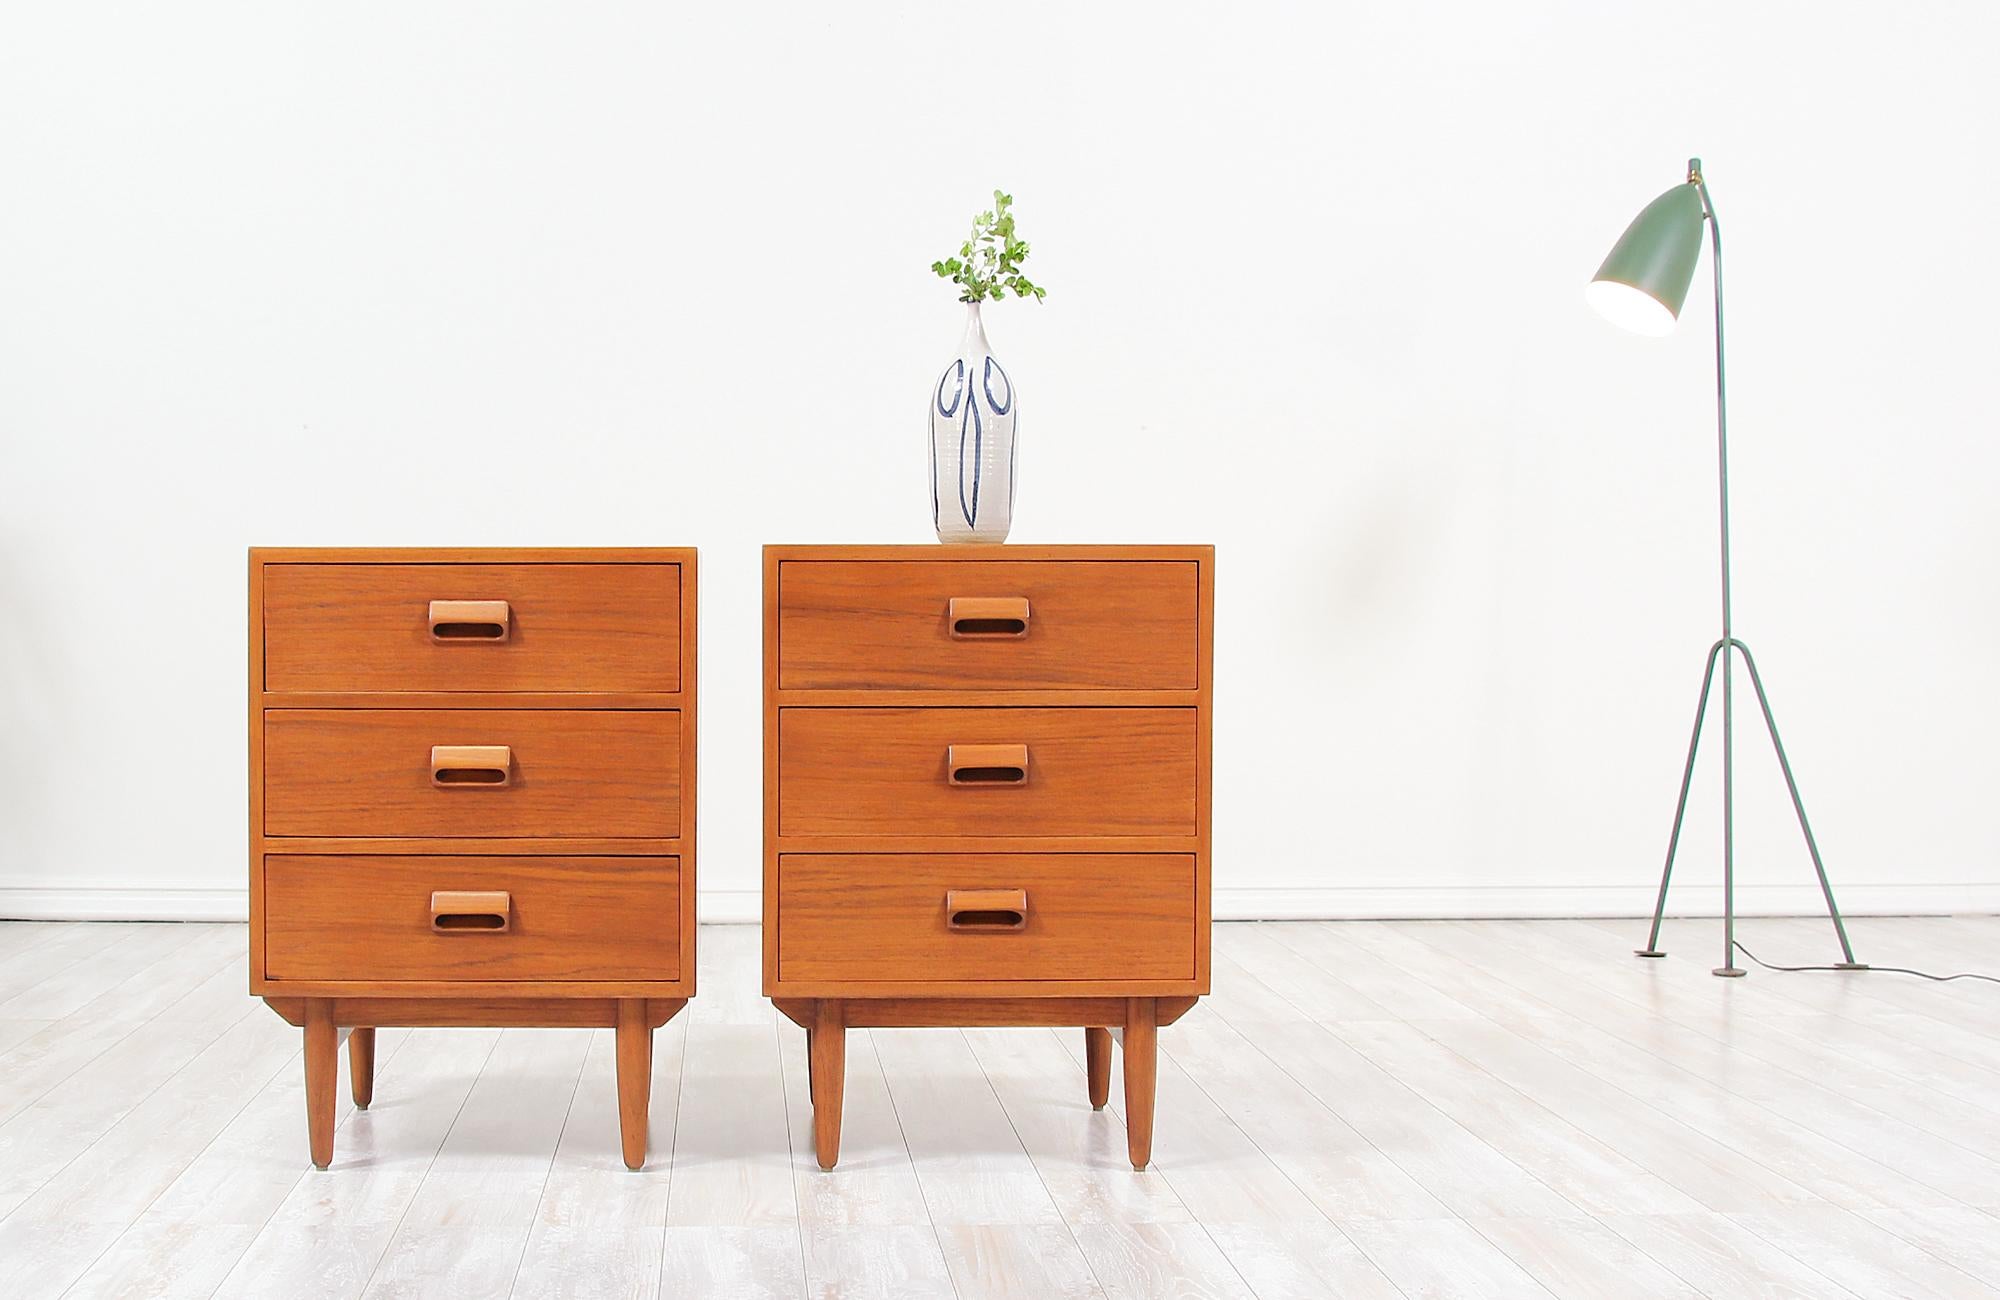 Stunning pair of nightstands designed by Børge Mogensen for Søborg Møbler in Denmark circa 1950s. These rarely seen set of nightstands features a teak wood case with three drawers raised on four sturdy teak legs, showing quality construction and